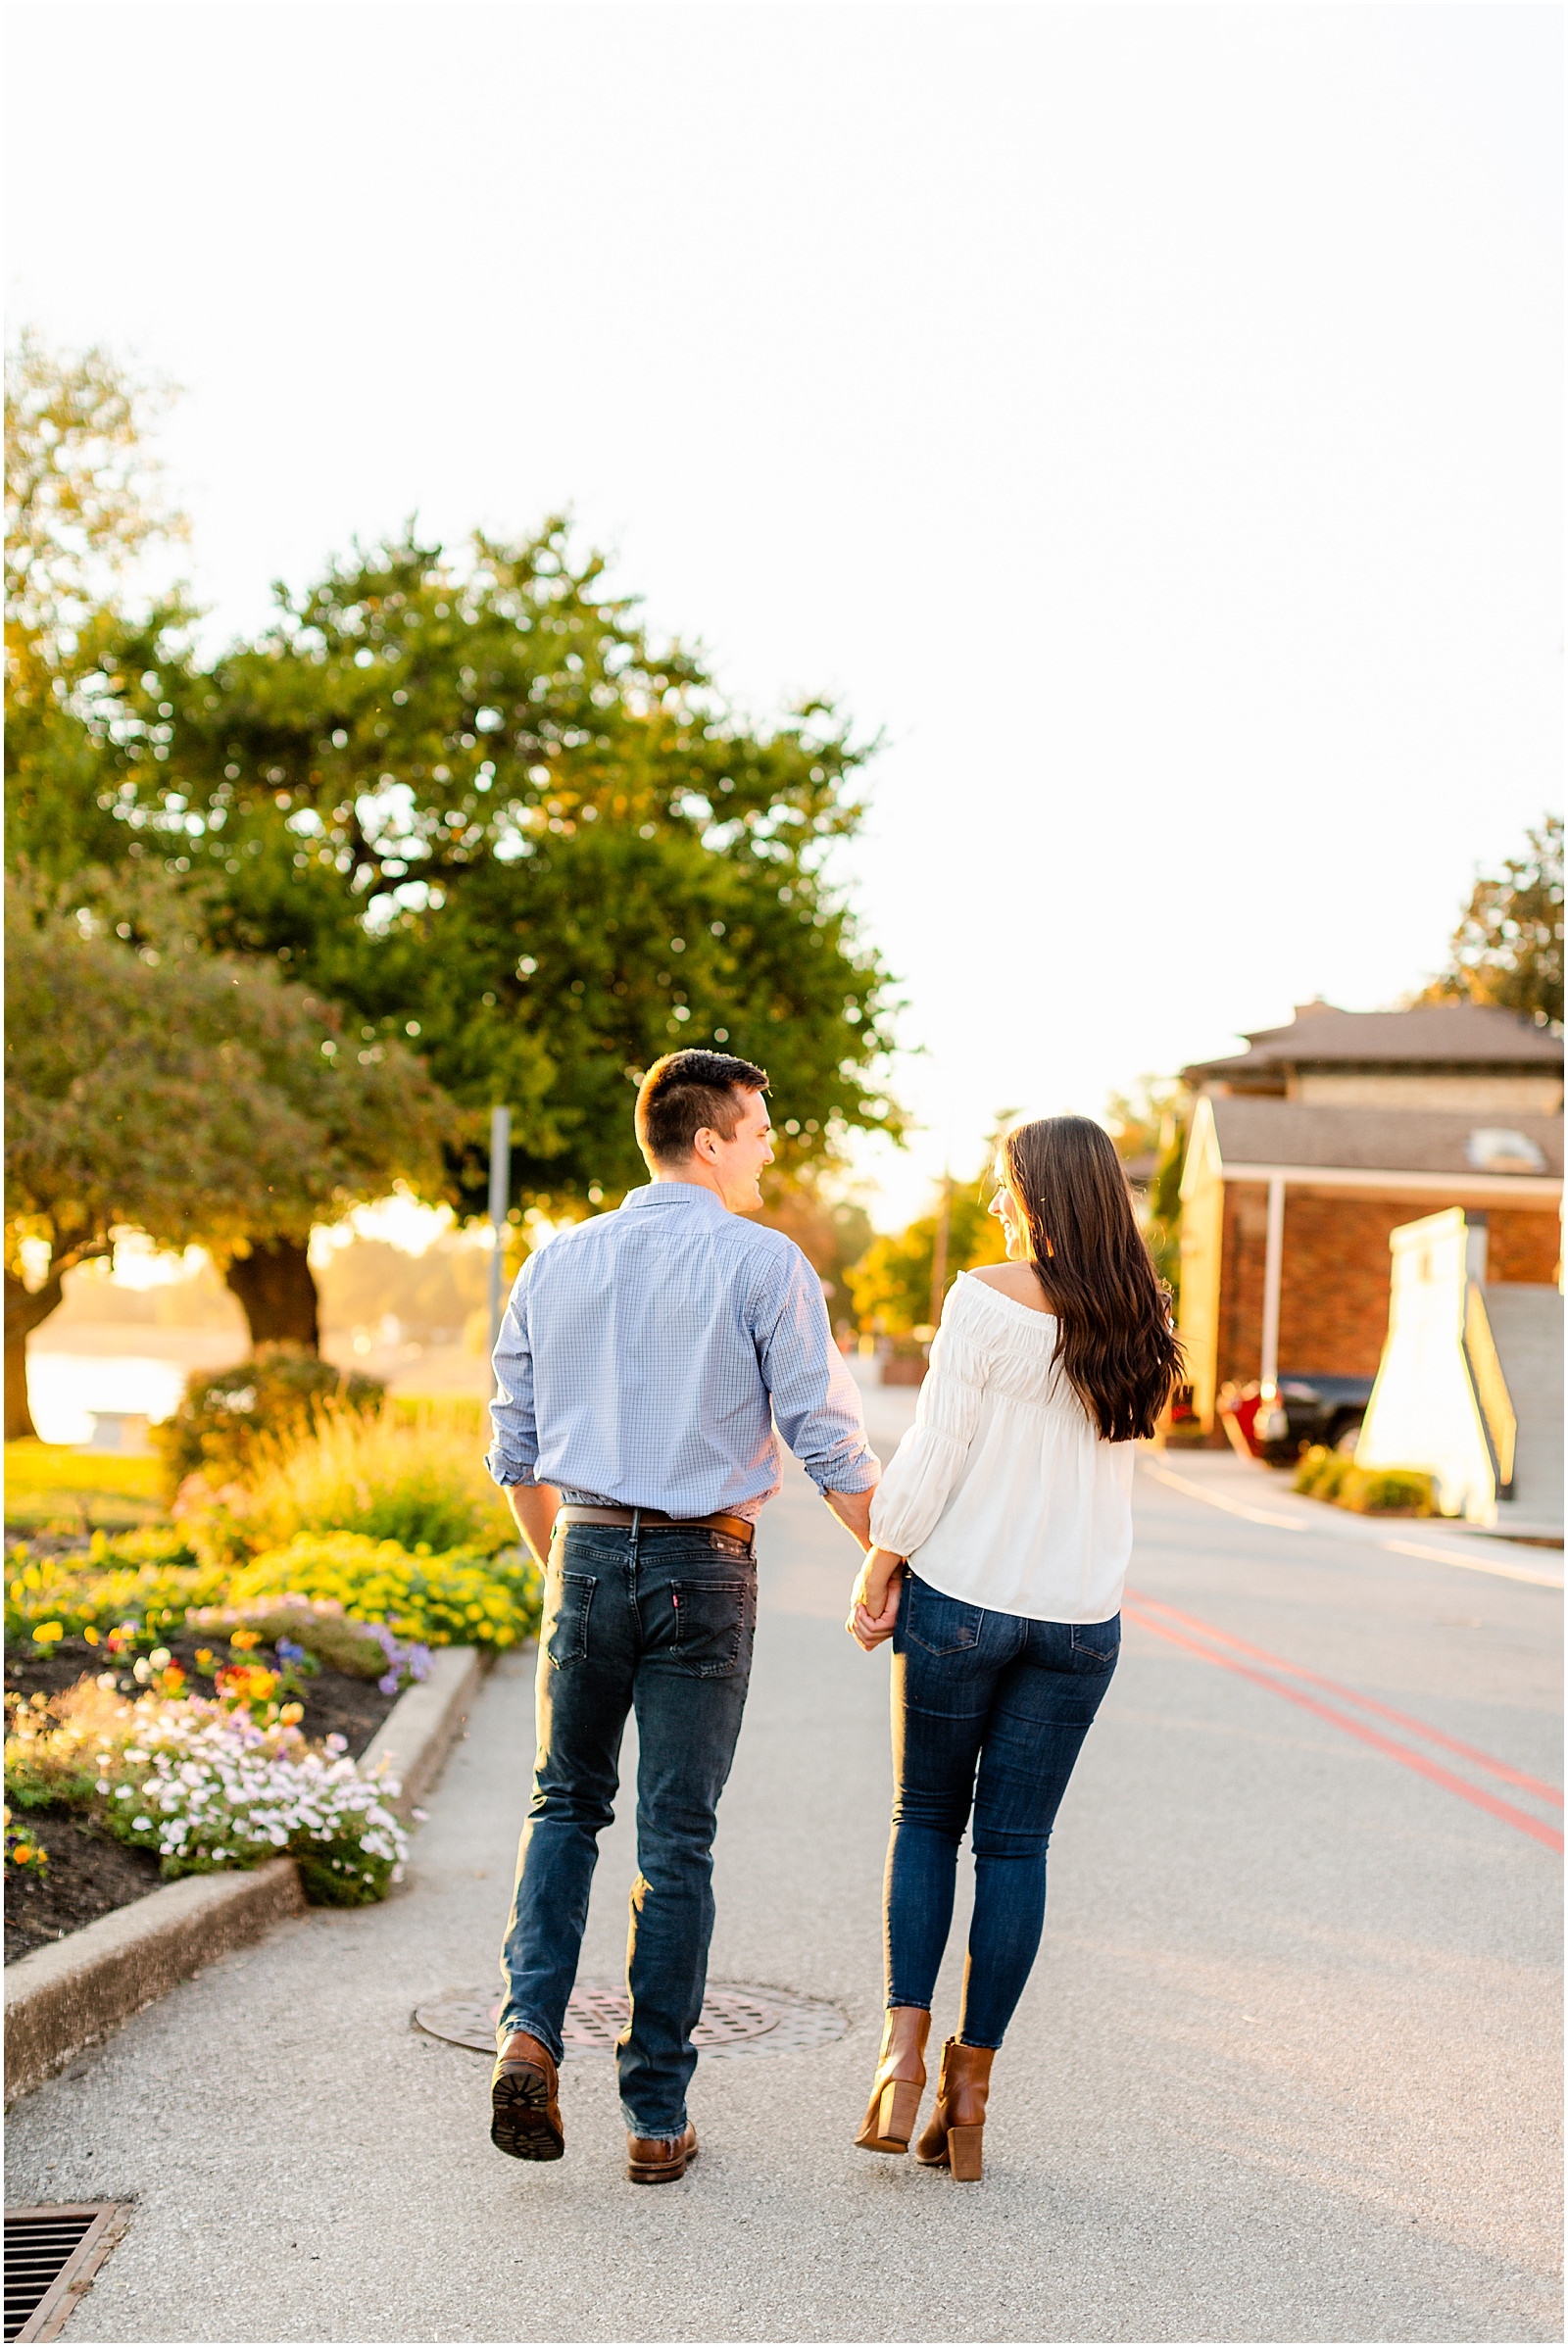 Emma and Jace's Downtown Newburgh Engagement Session | Bret and Brandie Photography | Evansville Indiana Wedding Photographers_0051.jpg